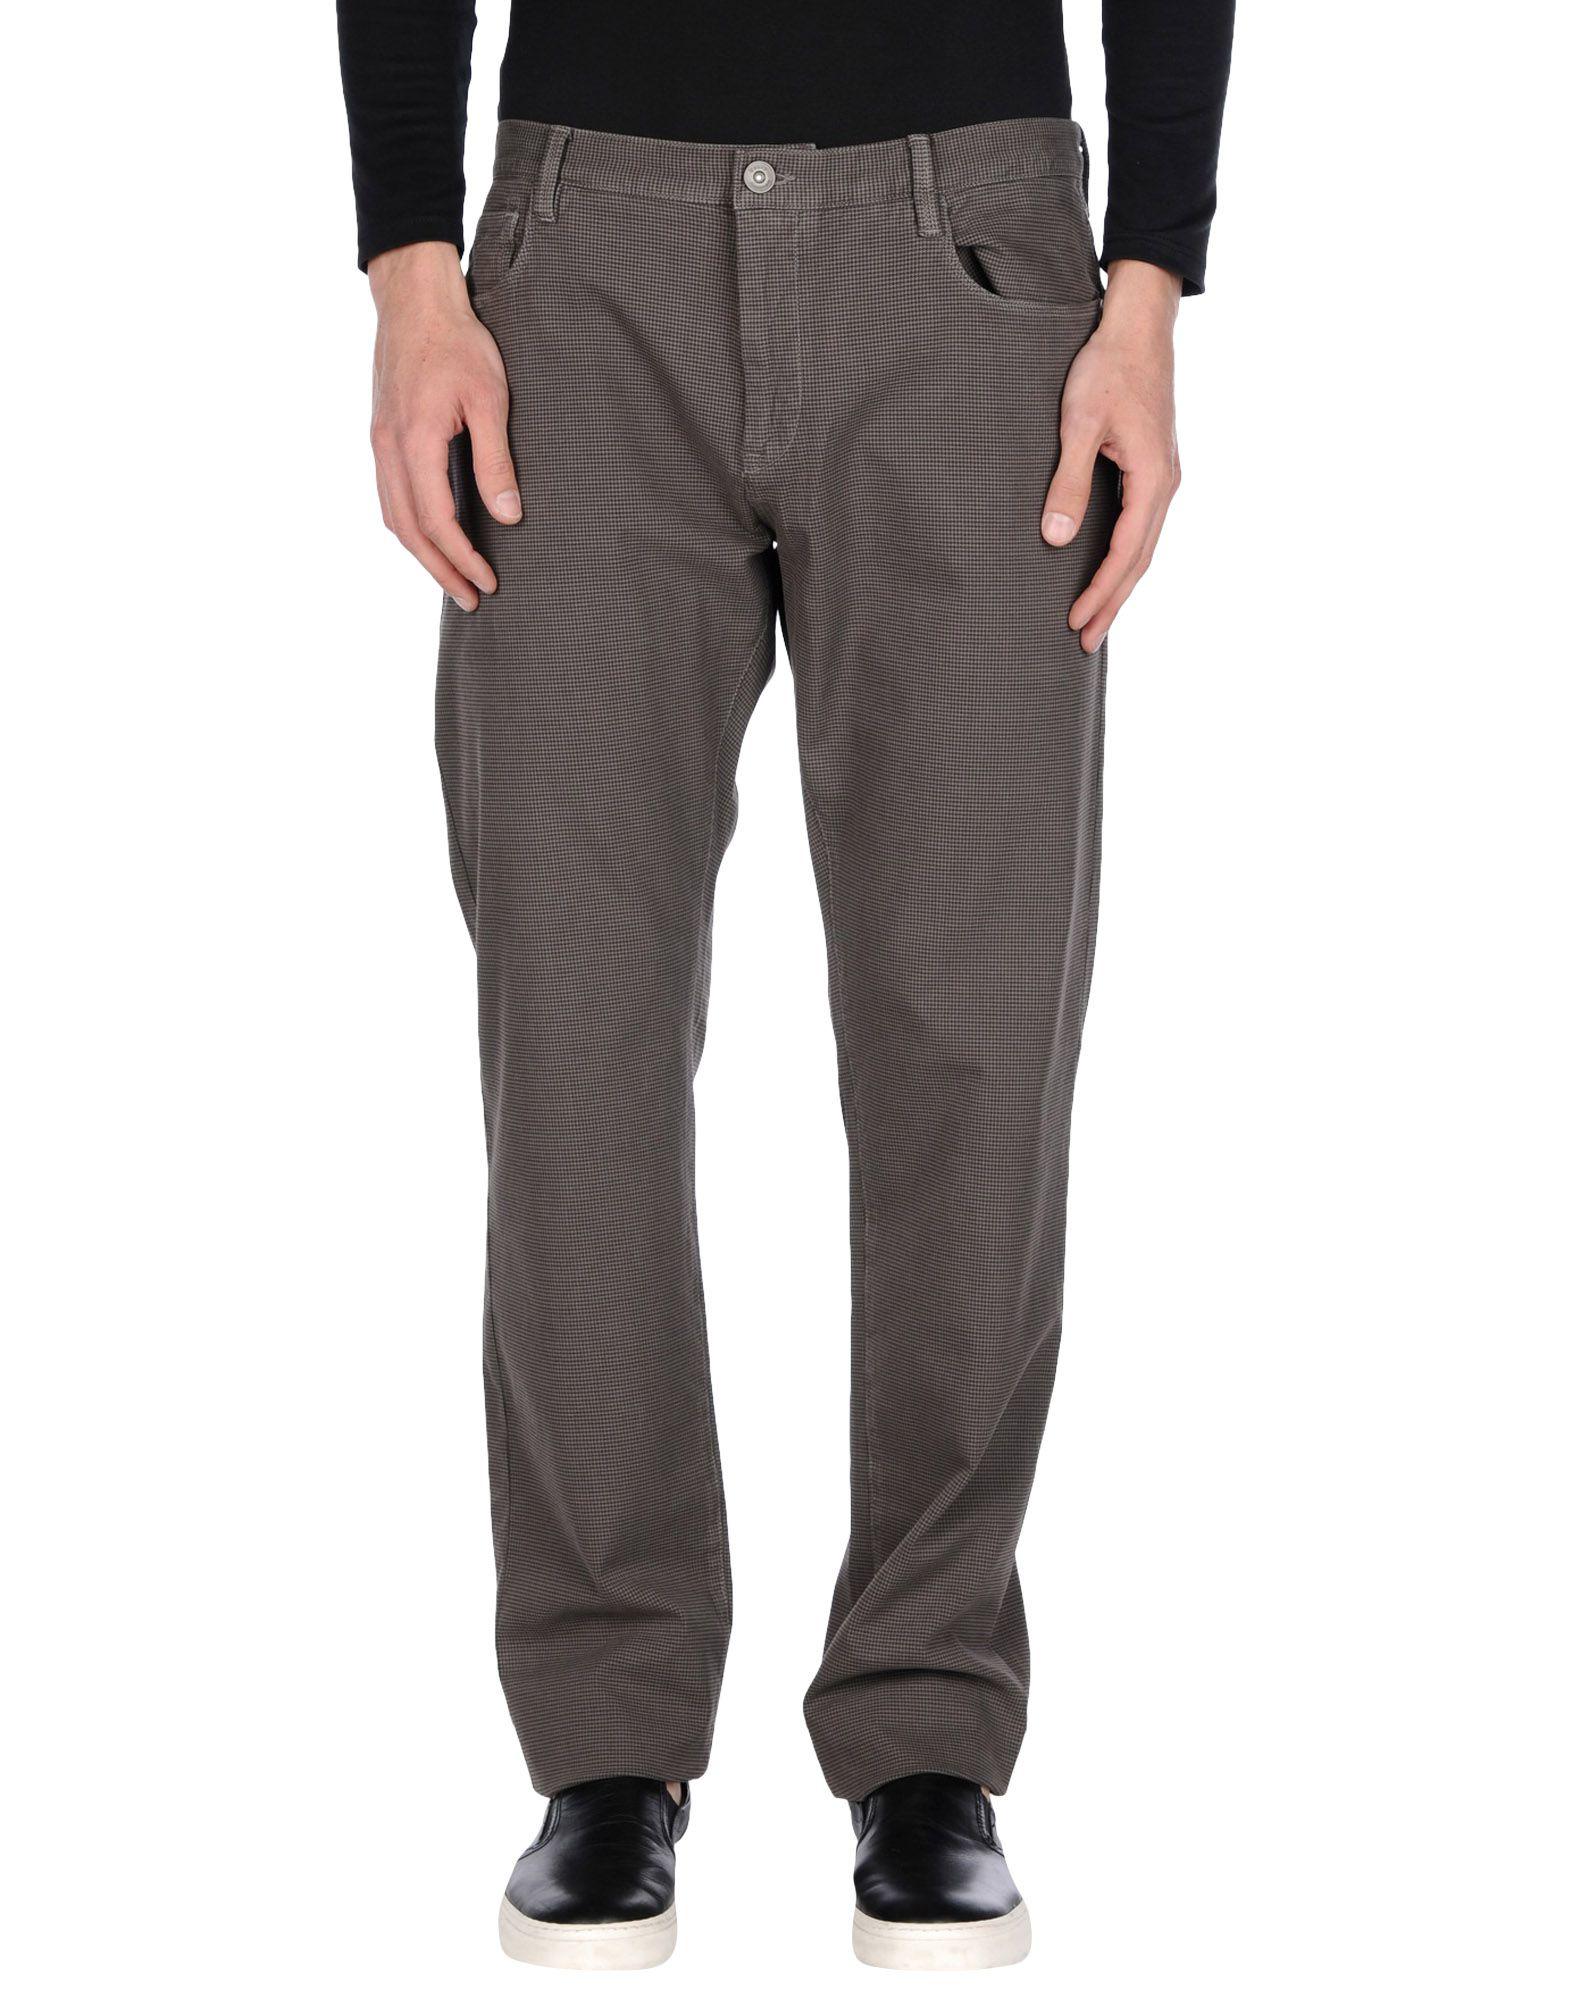 Henry Cotton's Cotton Casual Pants in Lead (Gray) for Men - Lyst